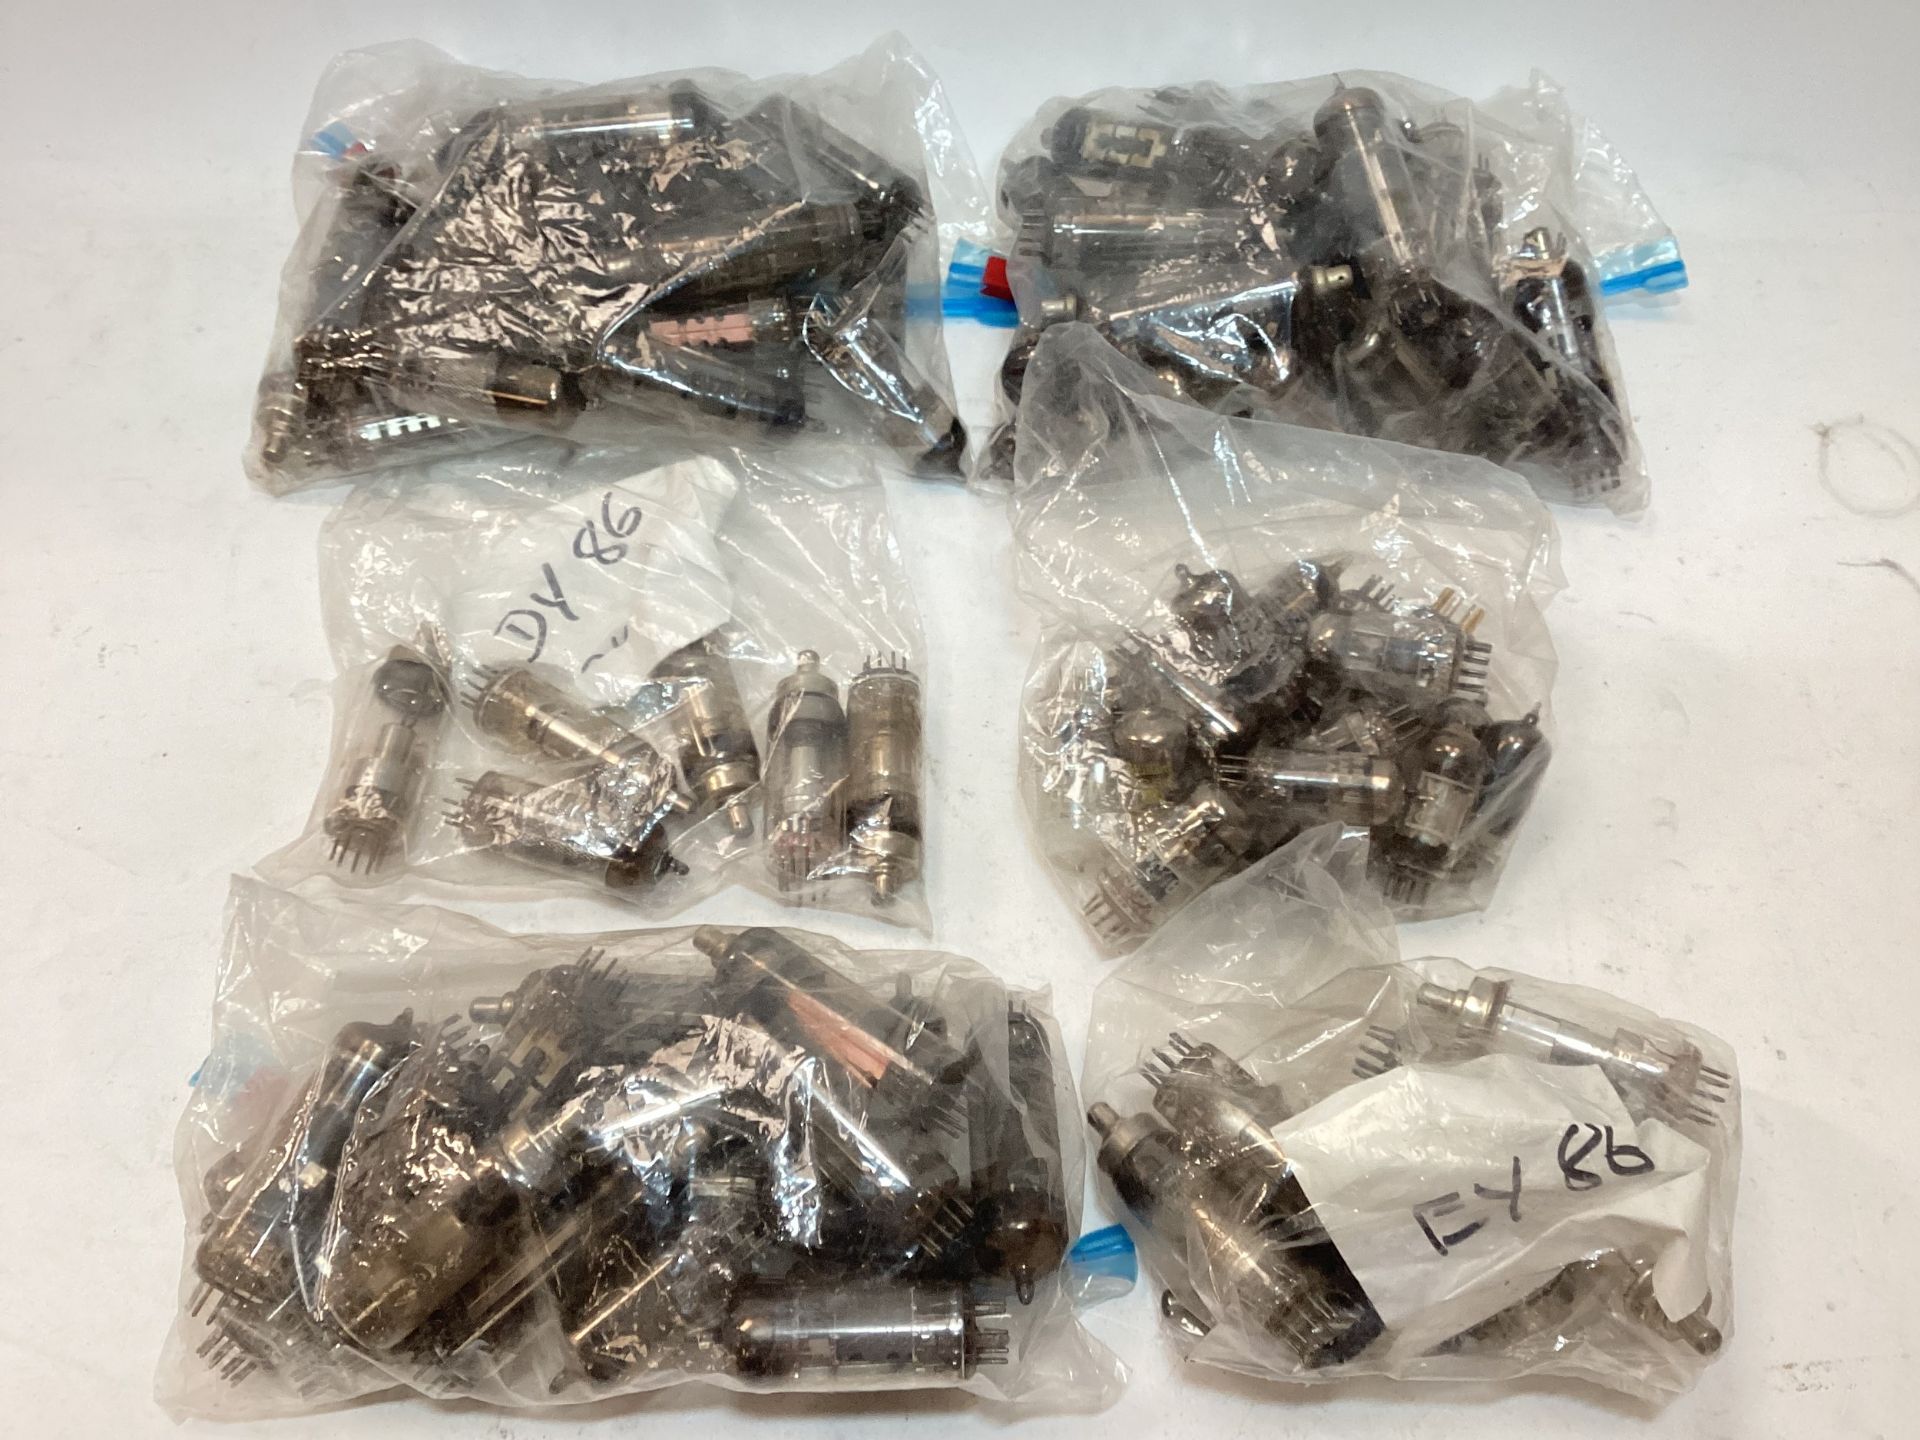 LARGE BOX OF VARIOUS VALVES. A very mixed selection of used valves found here in various conditions. - Image 2 of 3